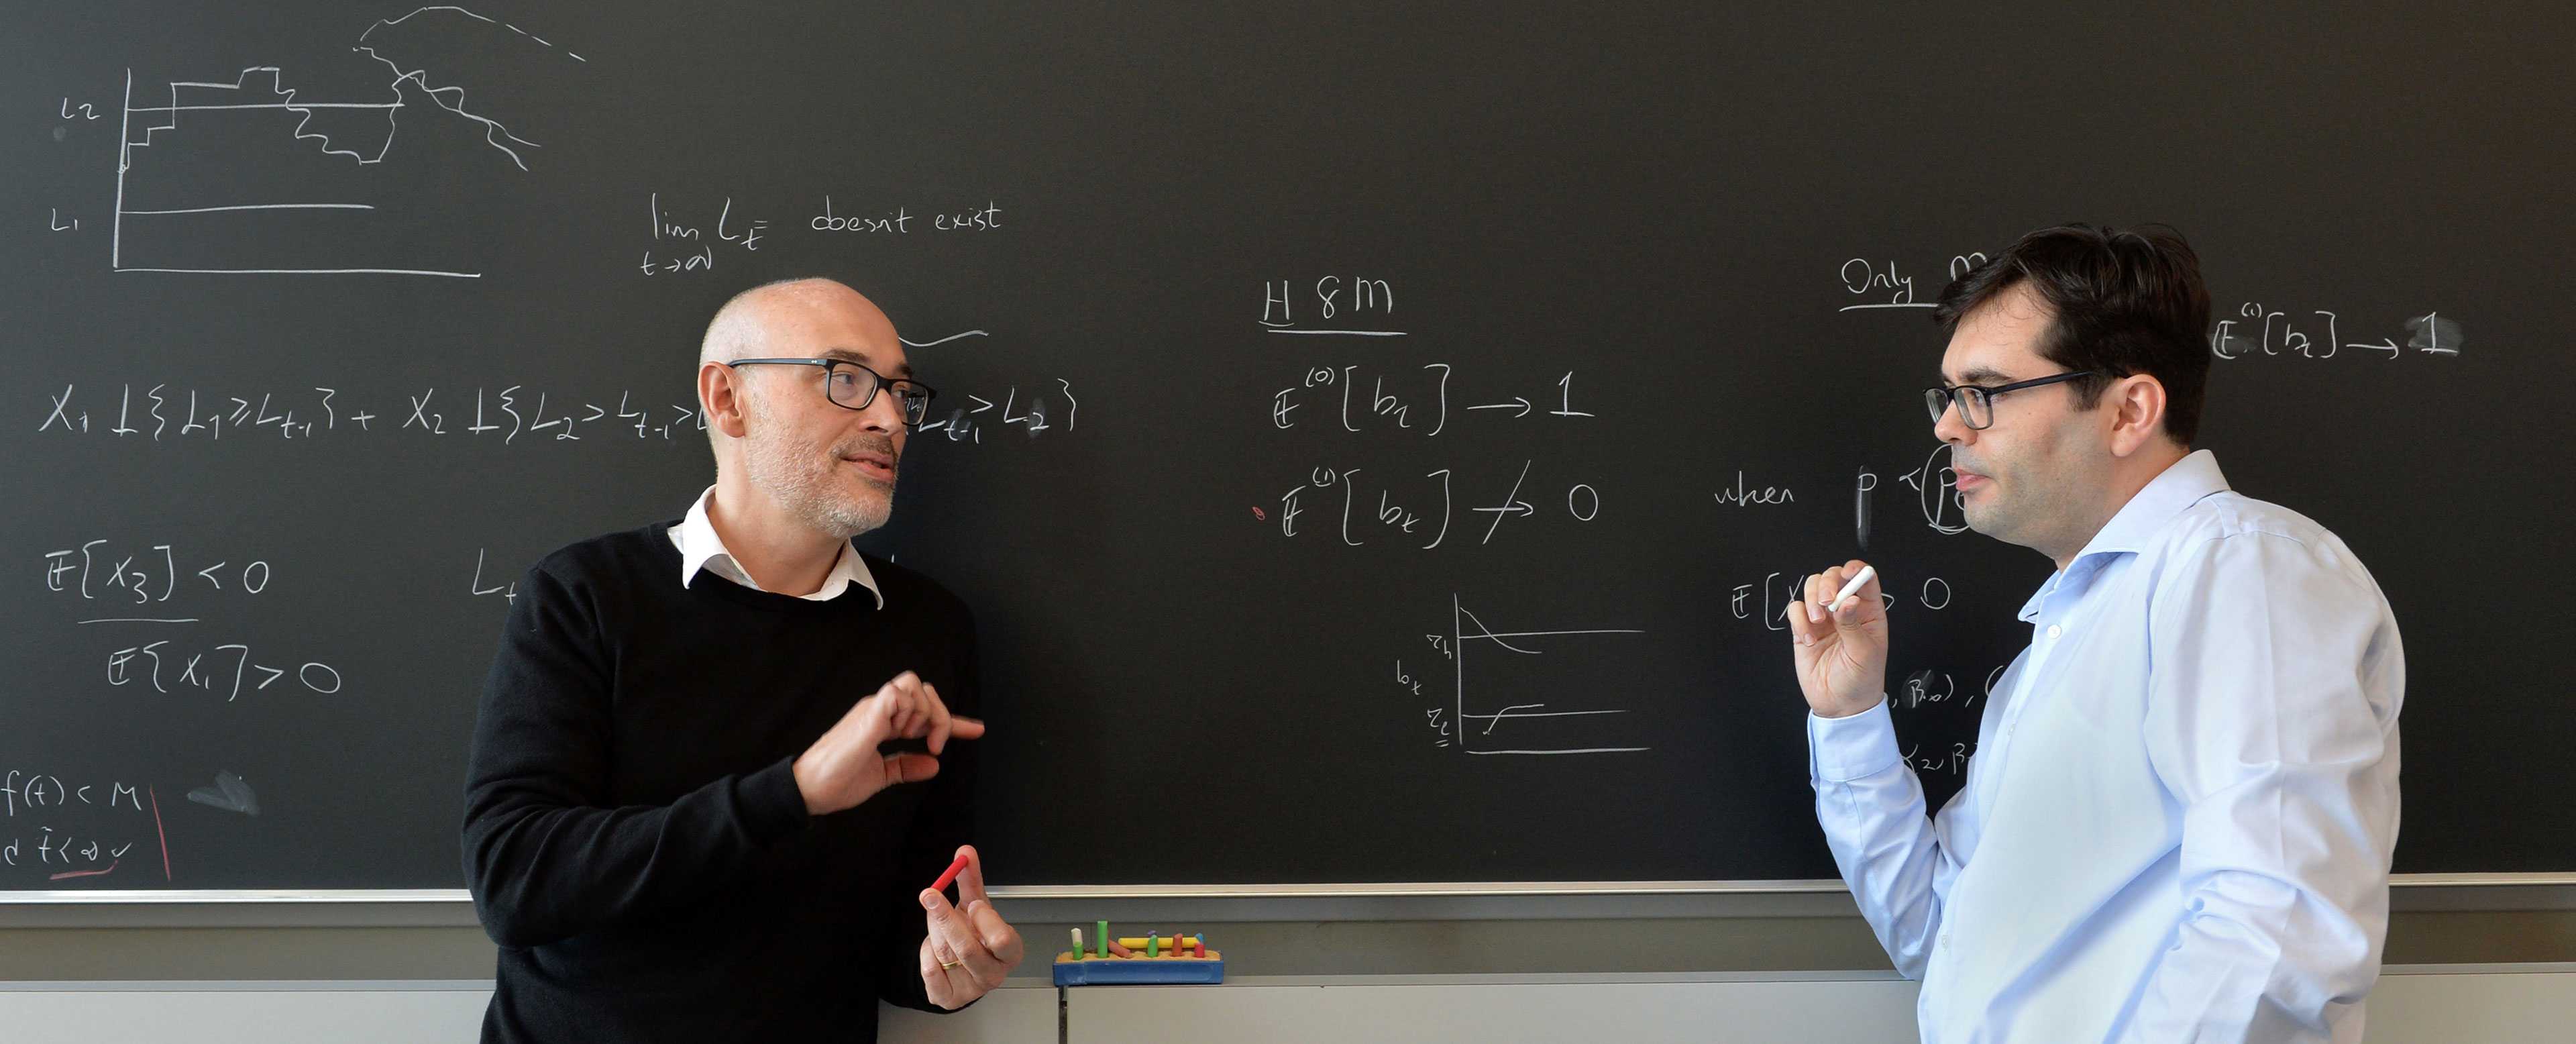 2 male professors standing in front of a blackboard having a discussion